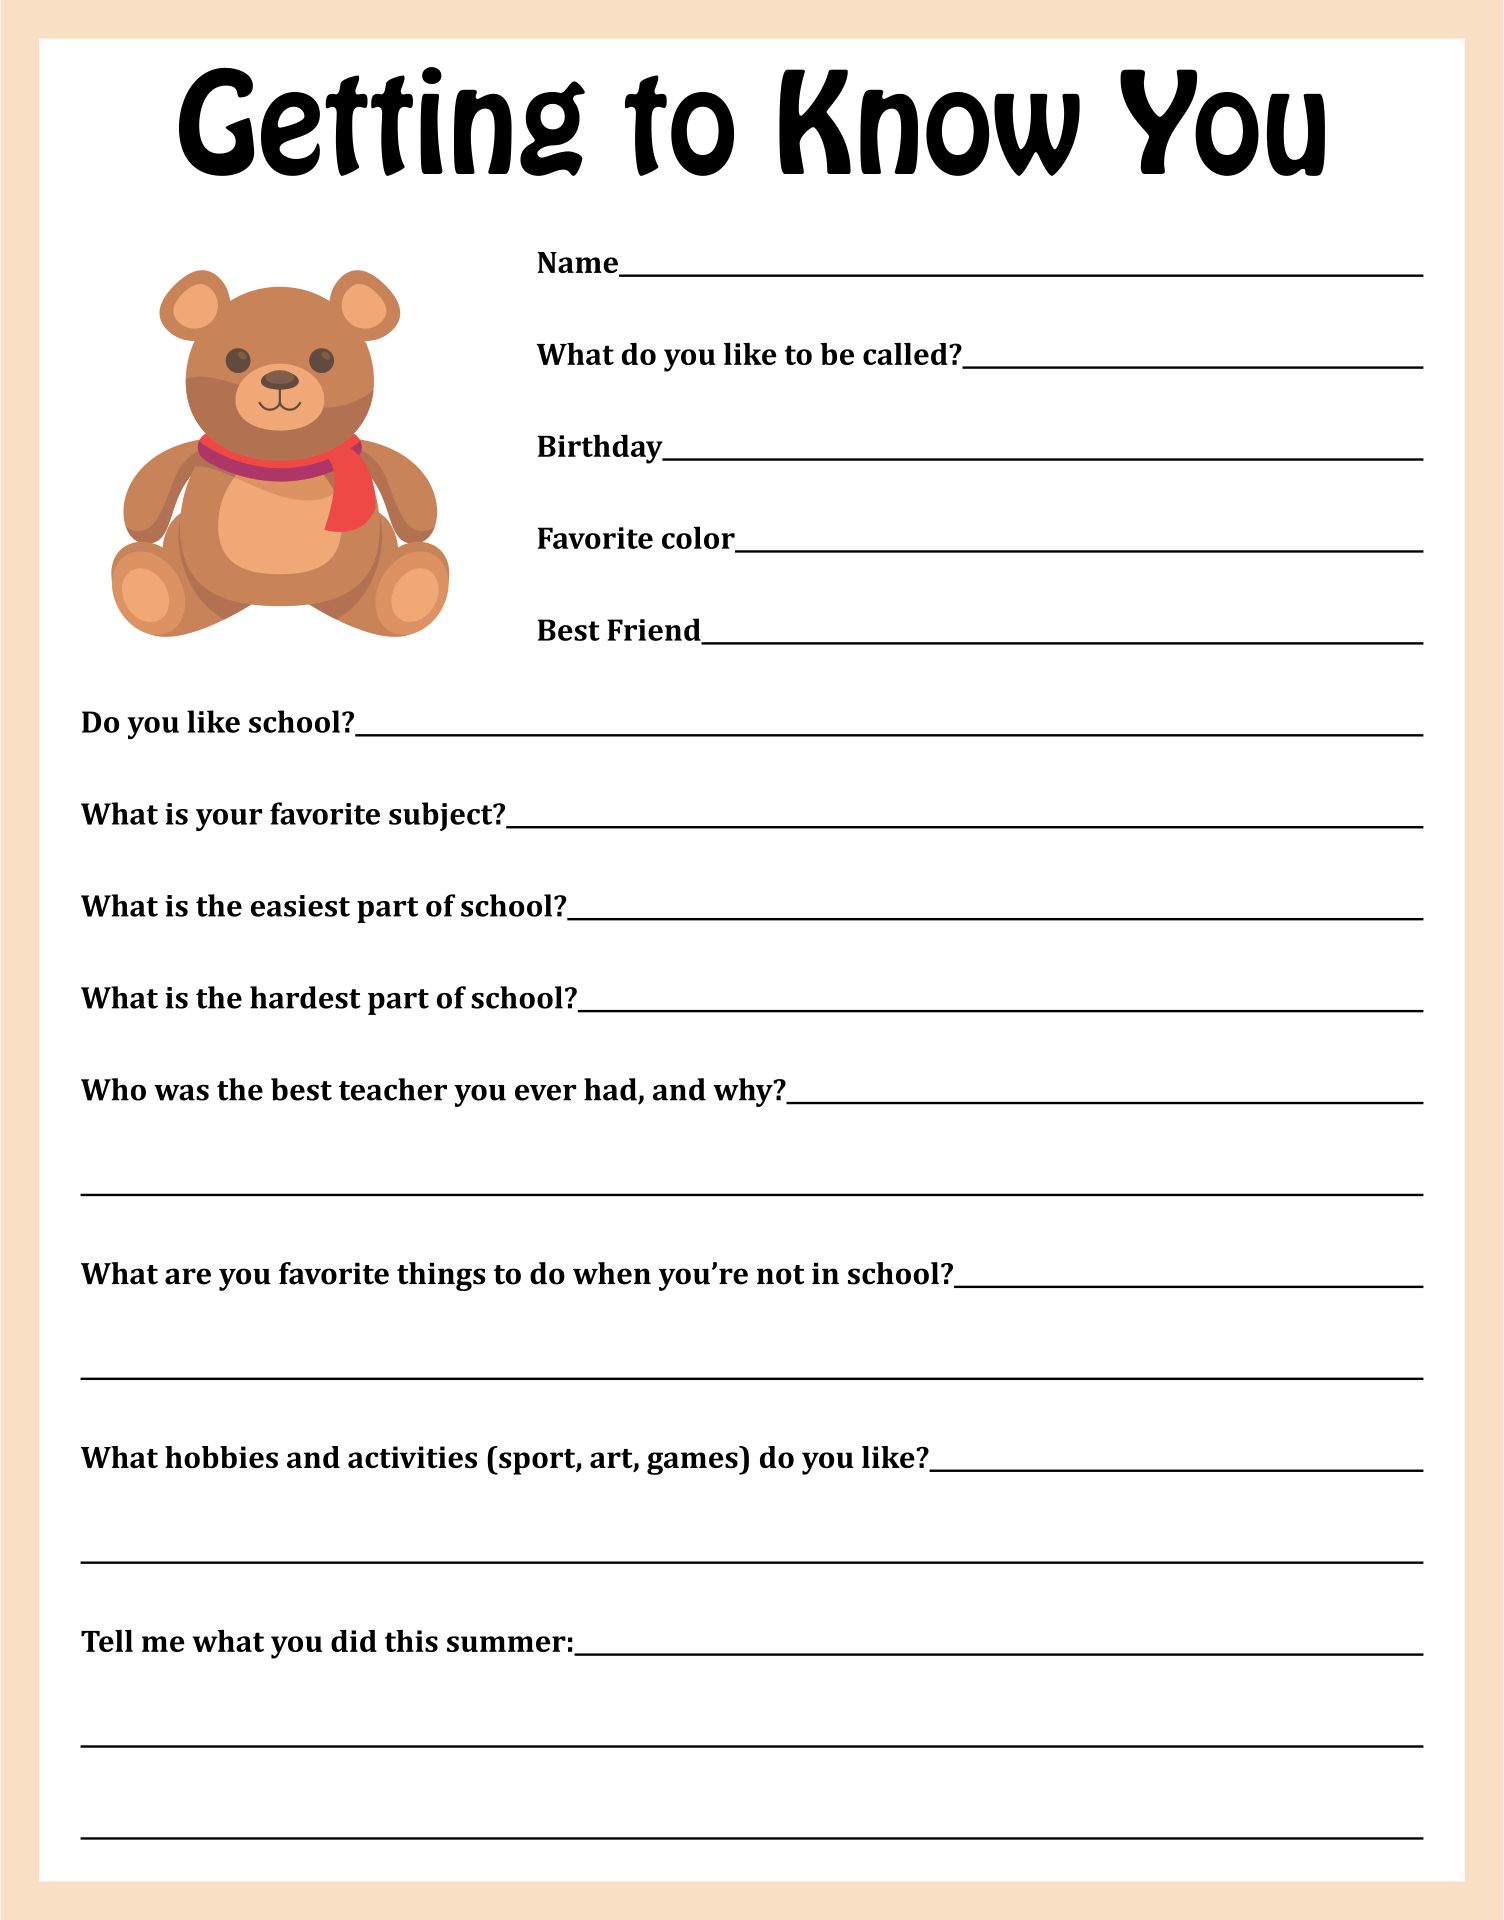 ligia-marstaller-getting-to-know-you-questions-worksheet-pdf